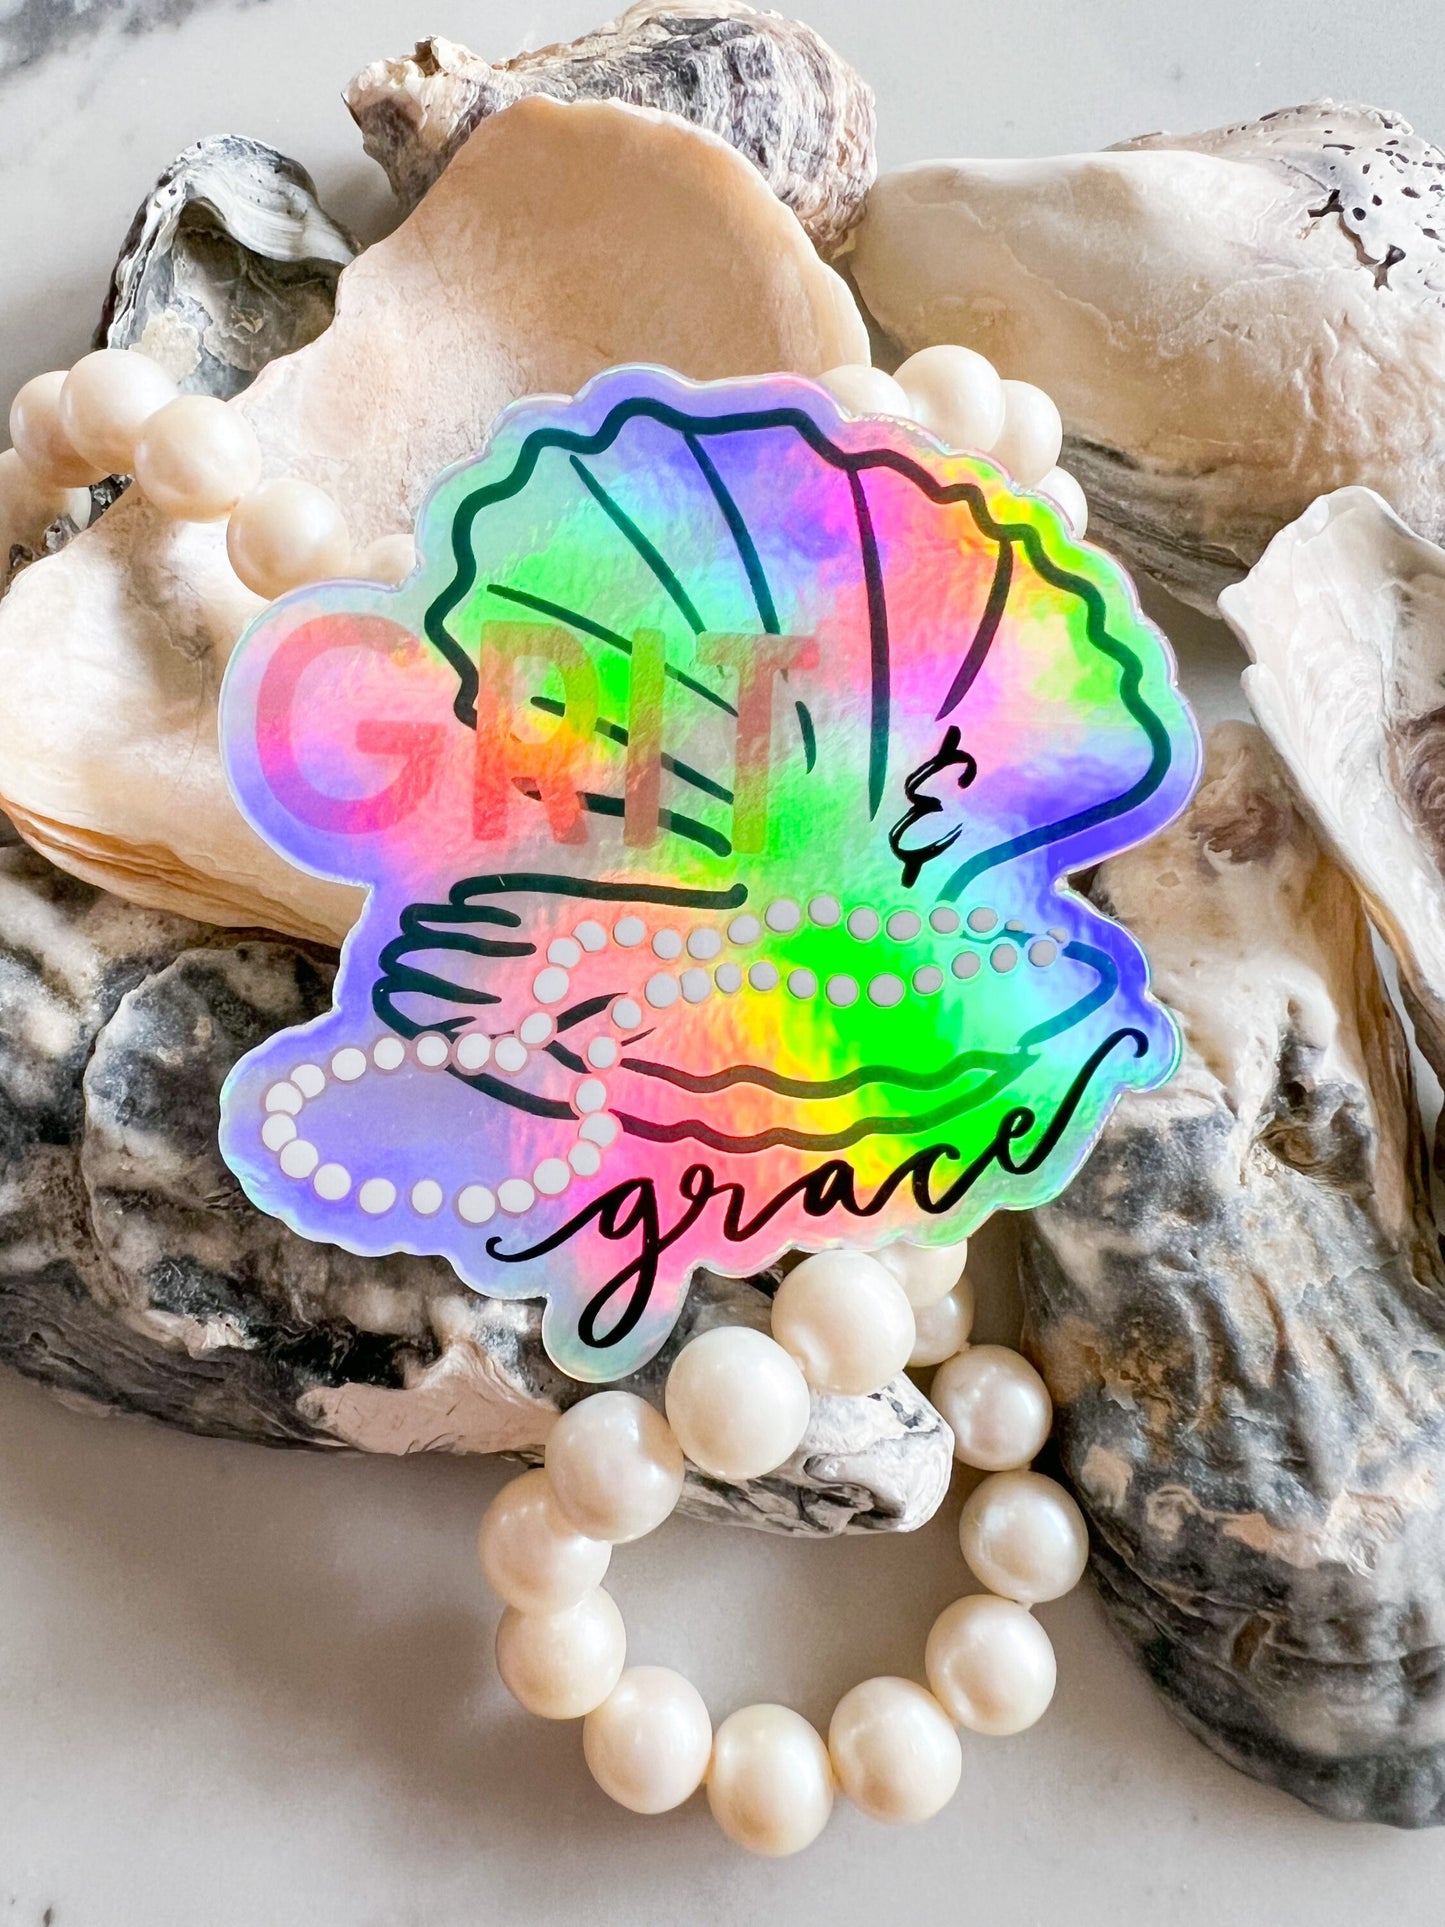 Grit and grace -pearl necklace oyster holographic sticker